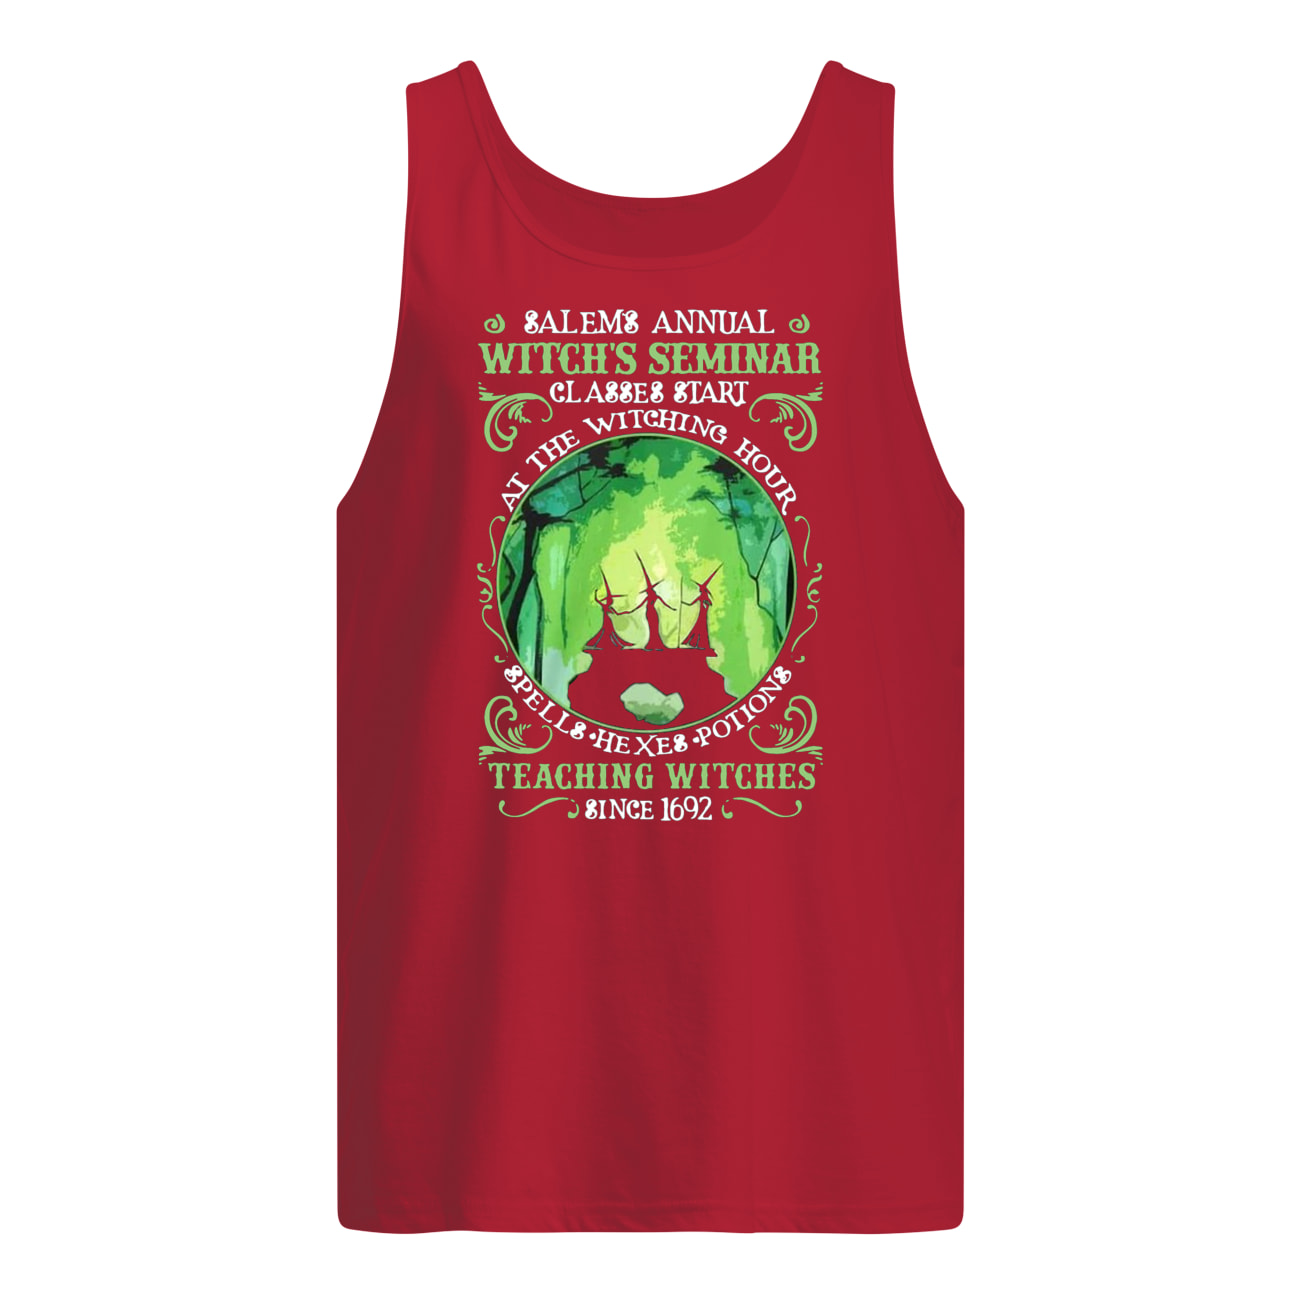 Salem annual witch seminar classes start at the witching hour spells hexes potions teaching witches sine 1692 tank top